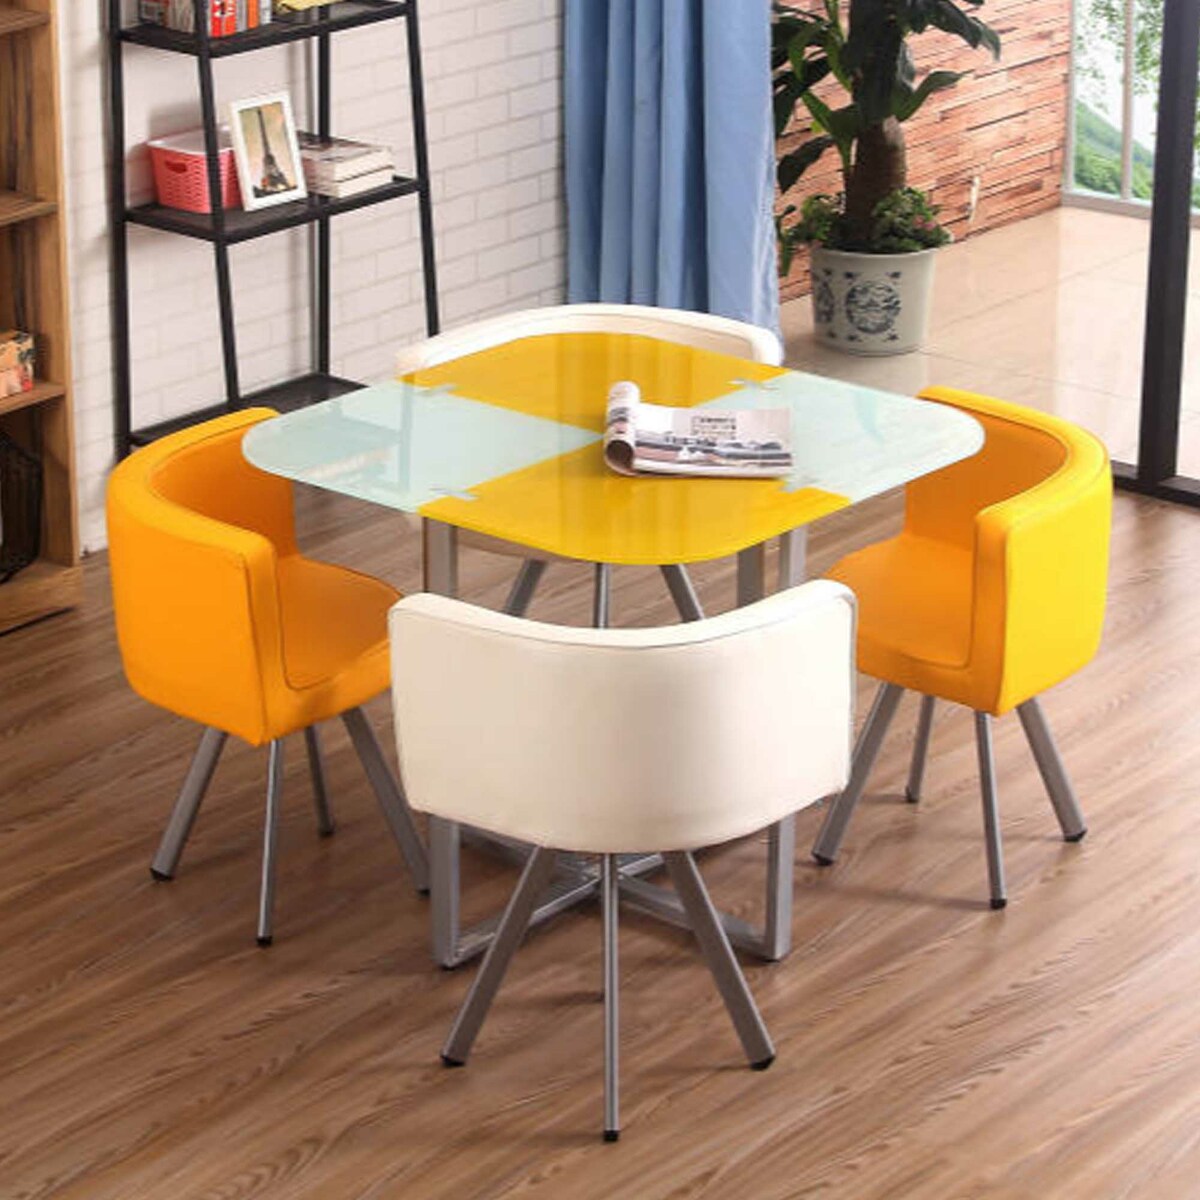 Buy Maple Leaf Home Glass Dining Table Size H75 X W90 X L90cm 4 Chair Yellow Off White Color Online Lulu Hypermarket Oman